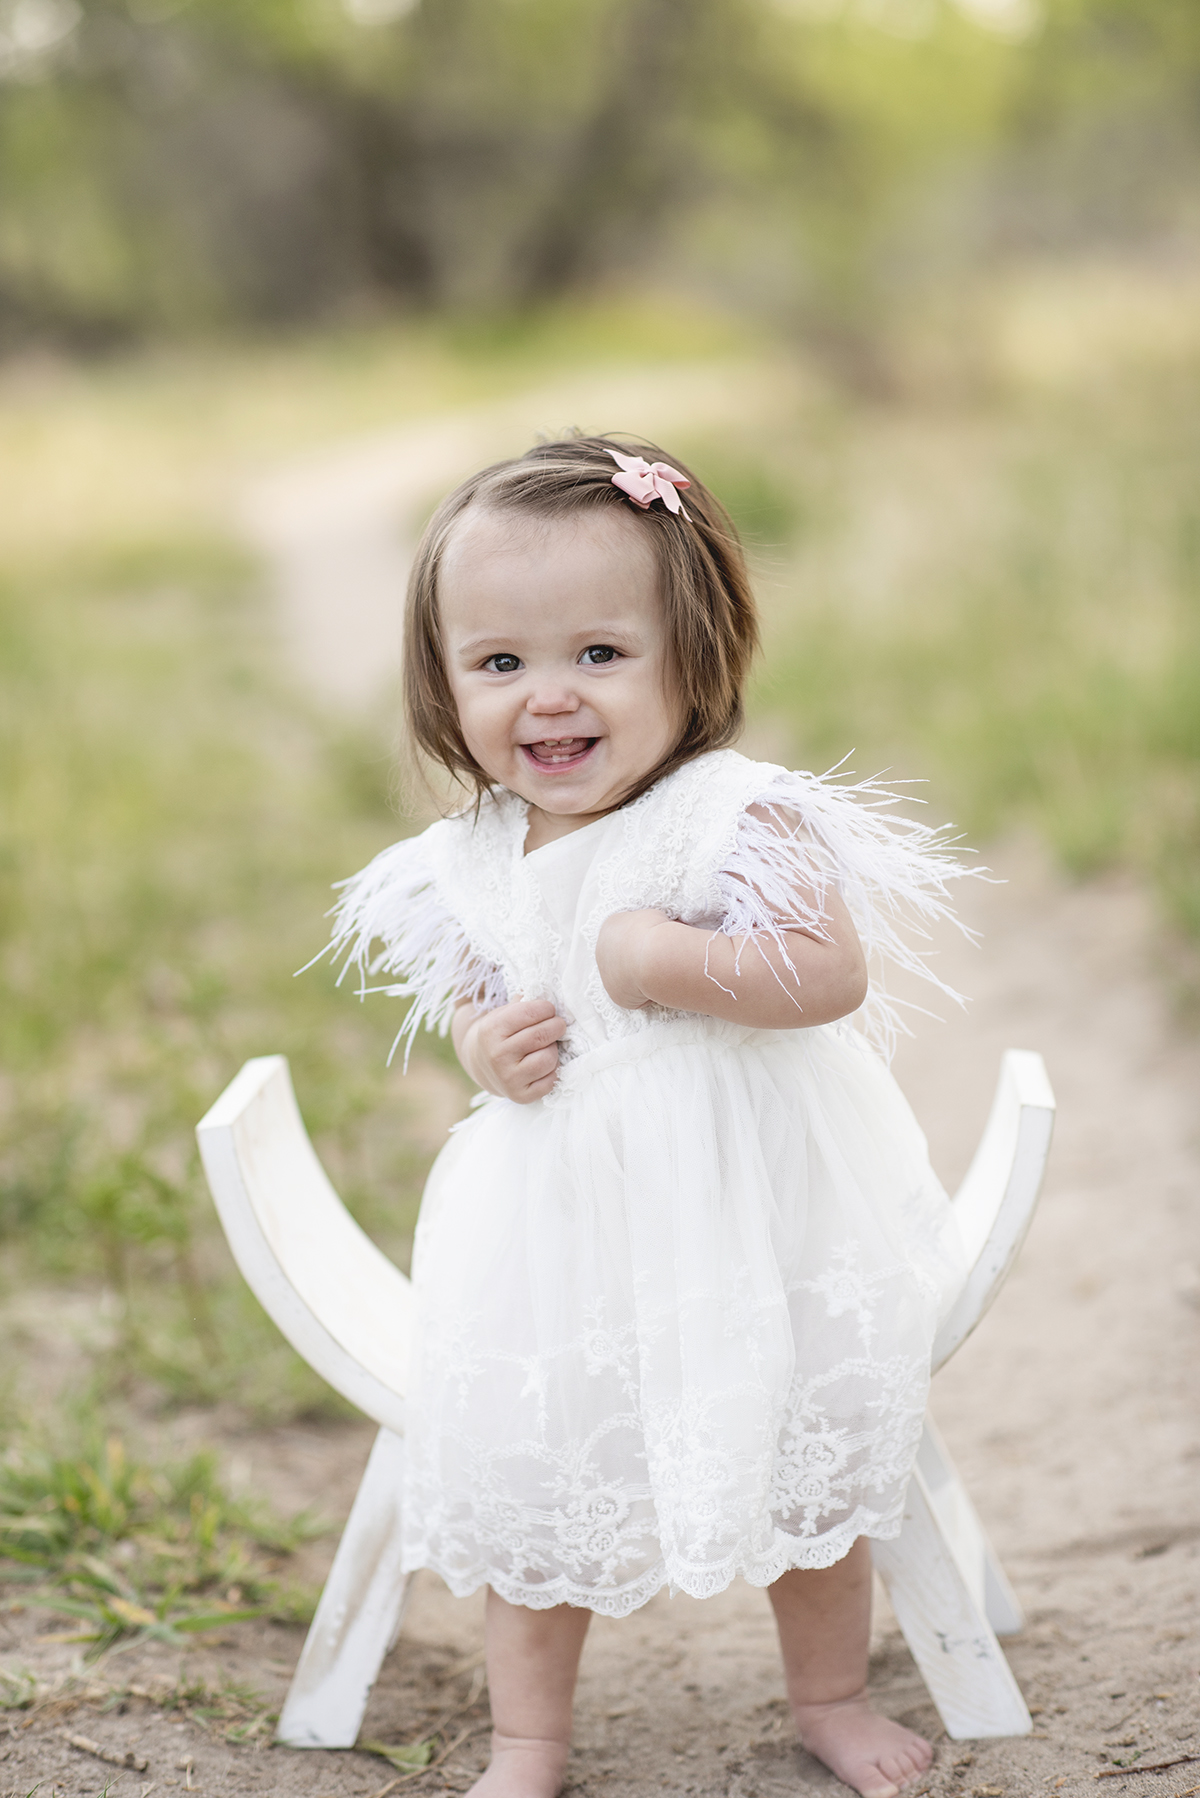 One Year Old Baby girl standing in nature with a white dress on smiling